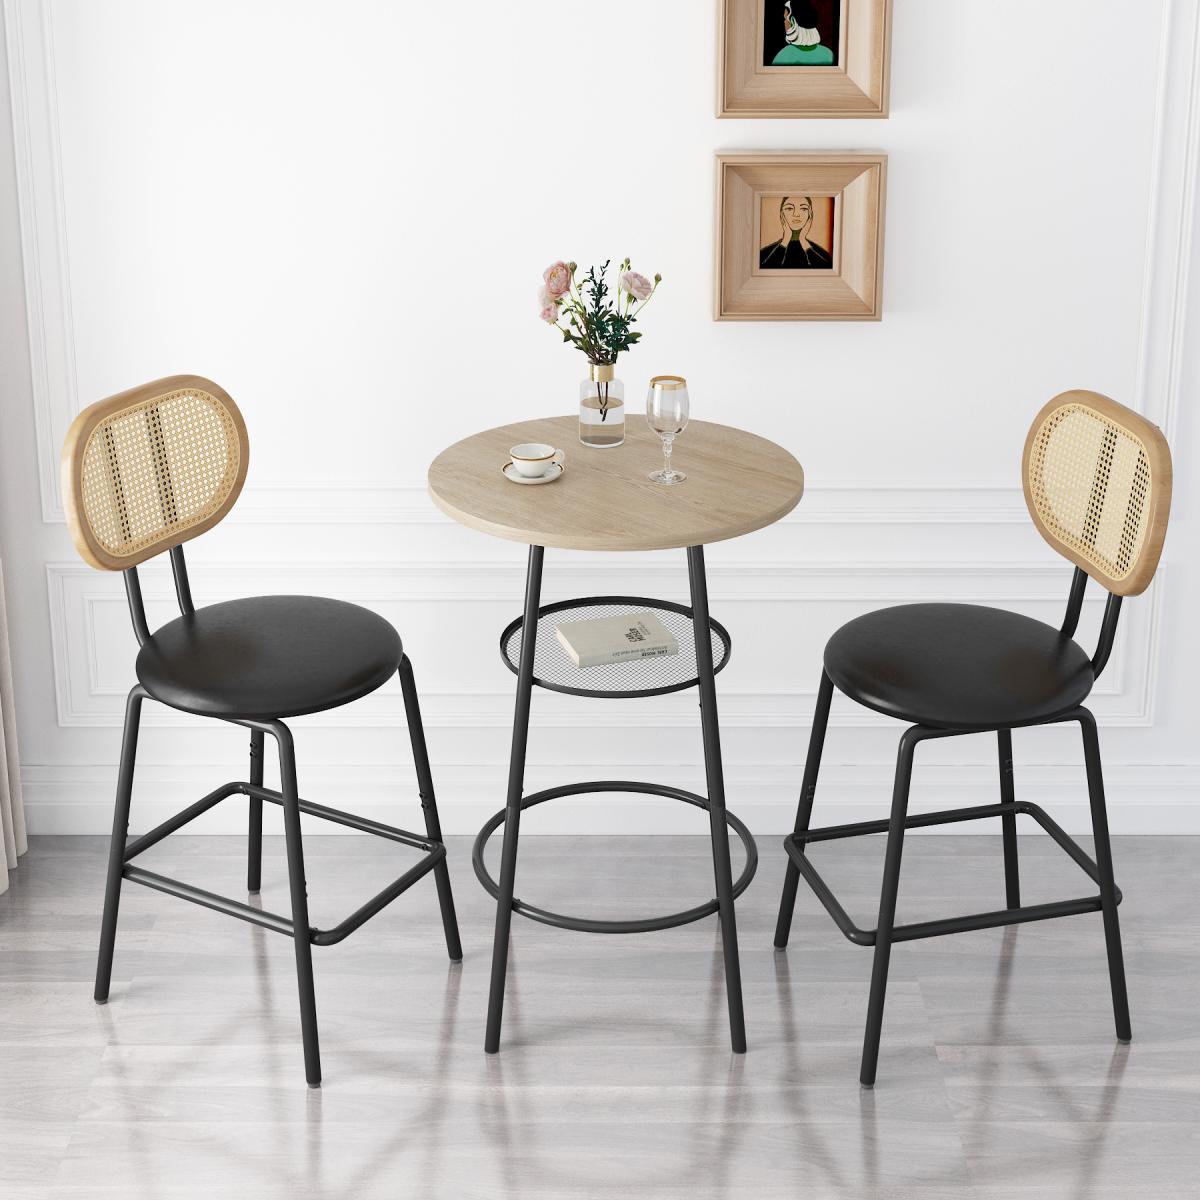 Rattan Bar Stool, Indoor Leather Bar Stools Set of 2, Counter Height Bar Stools with Metal Leg & Rattan Backrest, Armless Dining Room Chairs for Kitchens Island